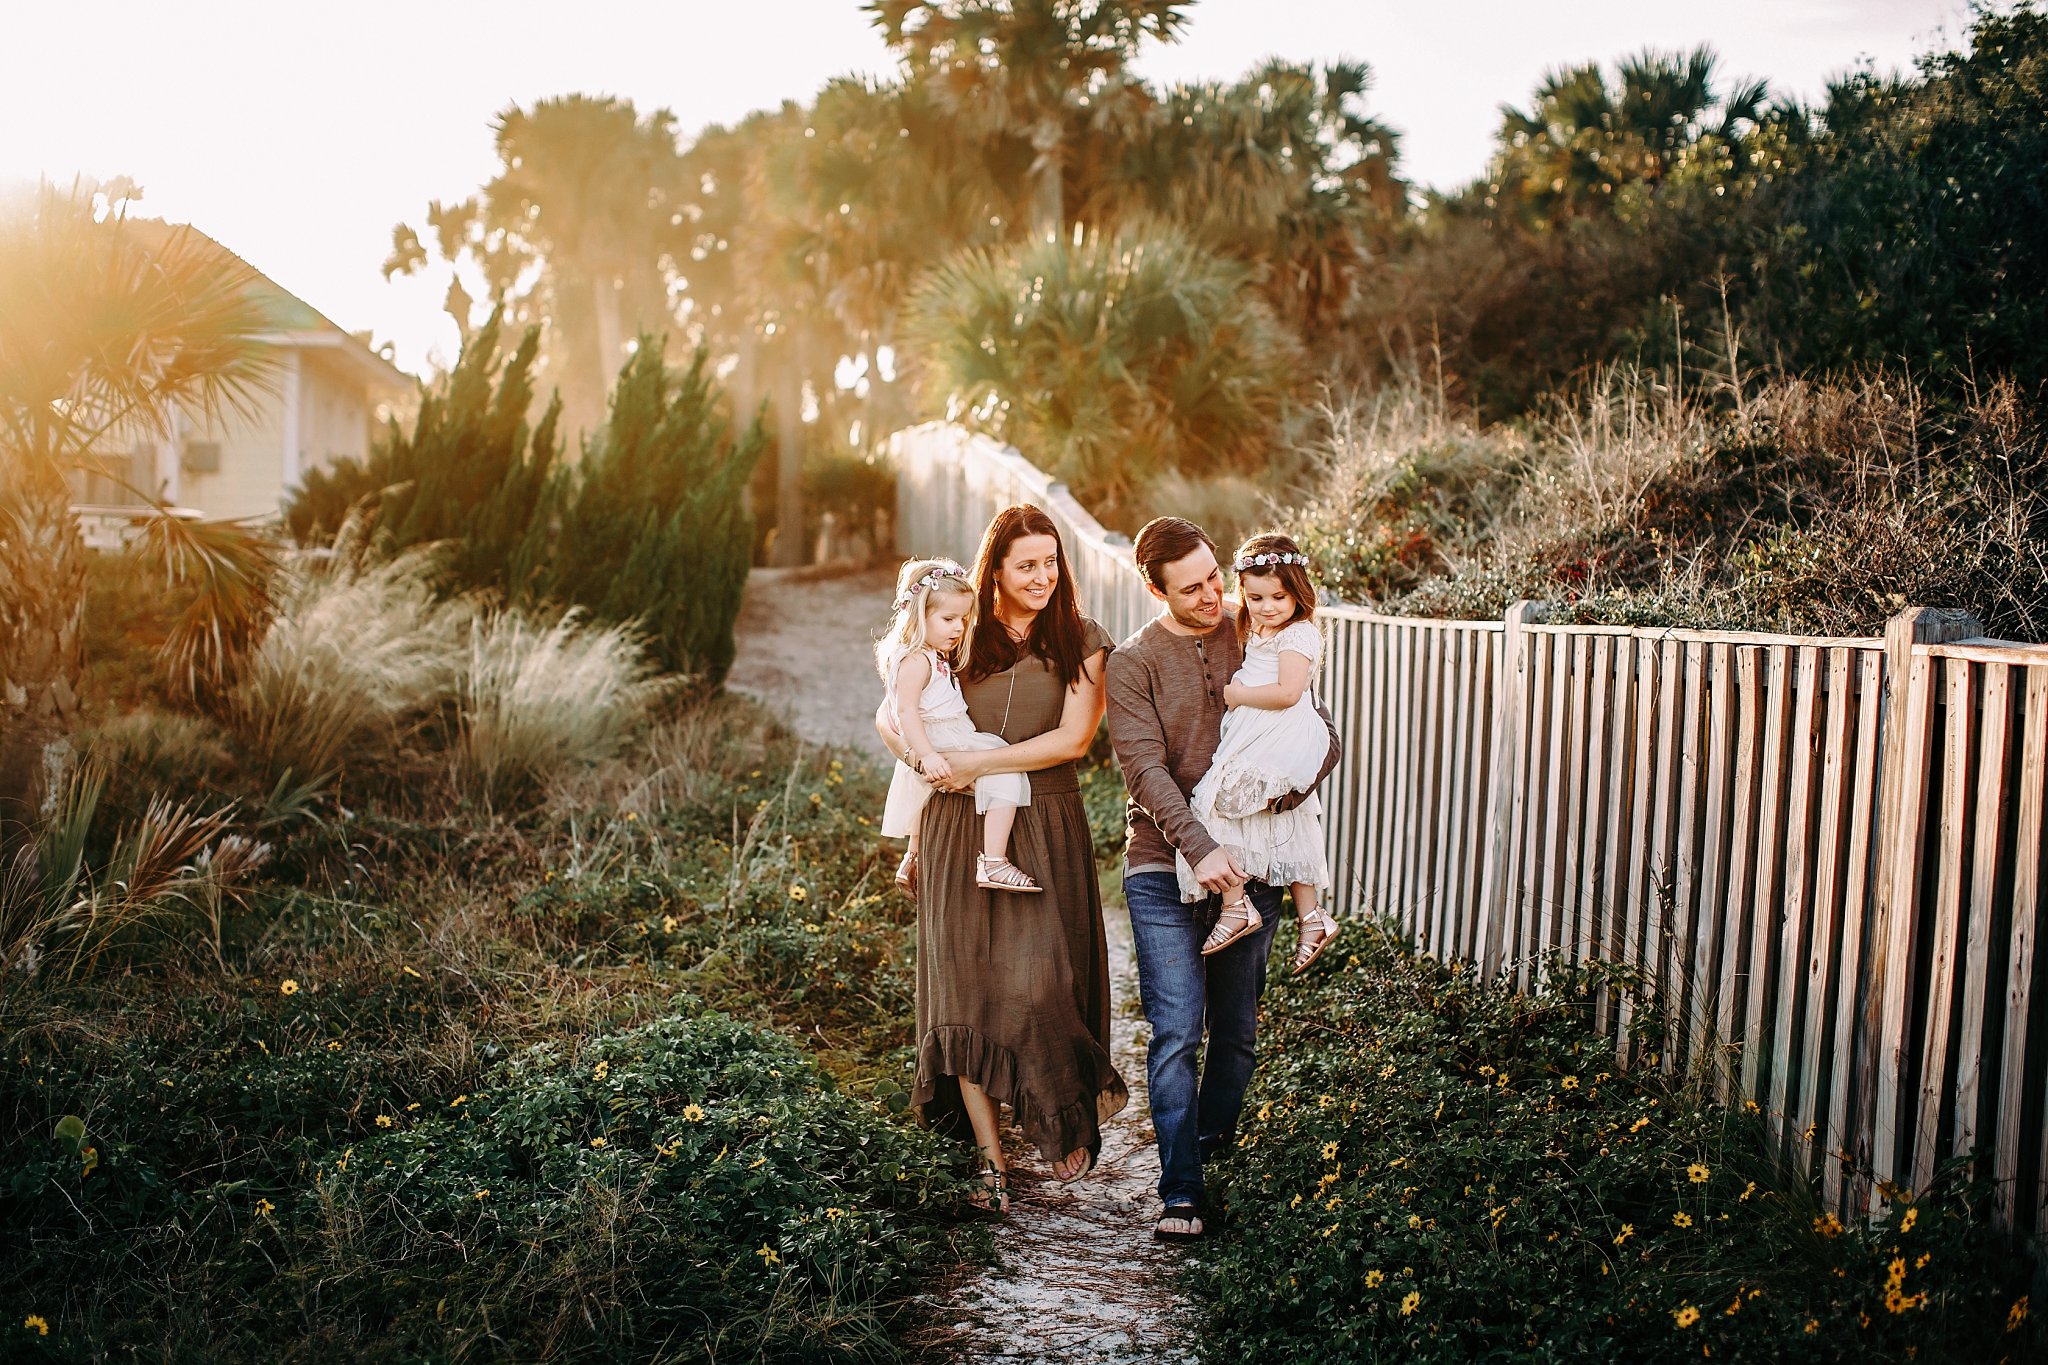 Beach Photos in Ponte Vedra family of 4 walking a path in the dunes